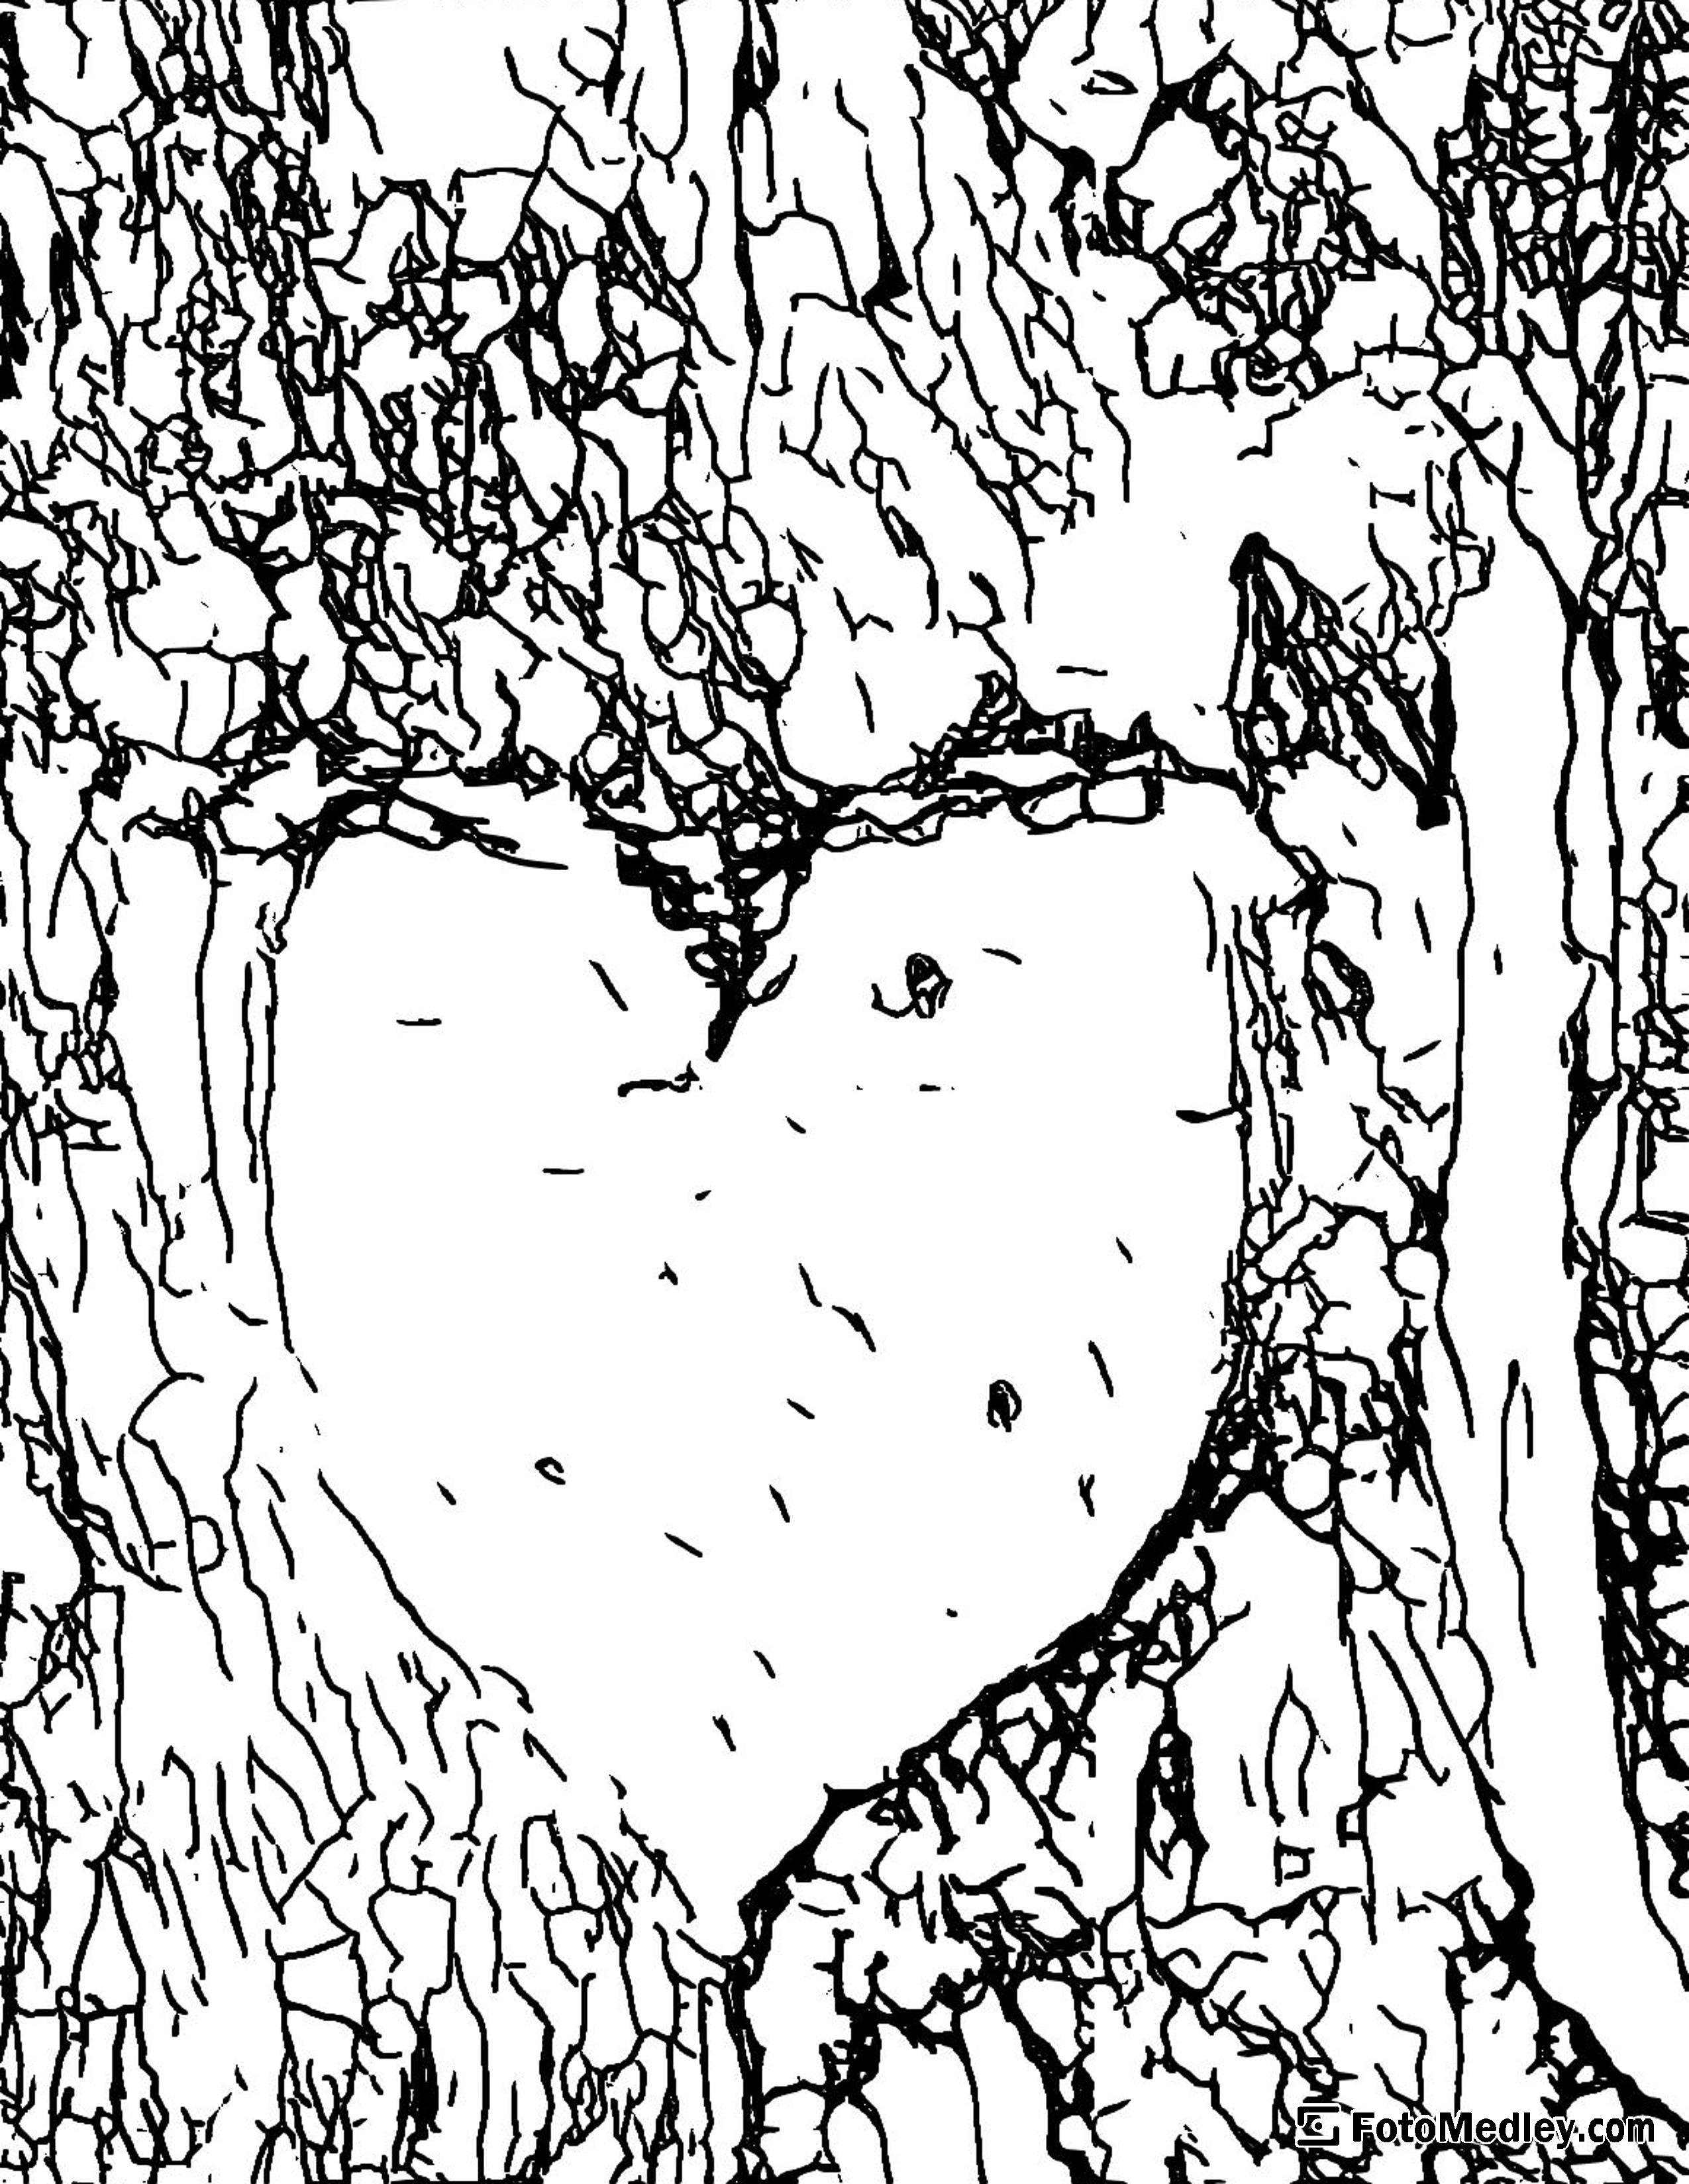 Free valentines coloring sheet